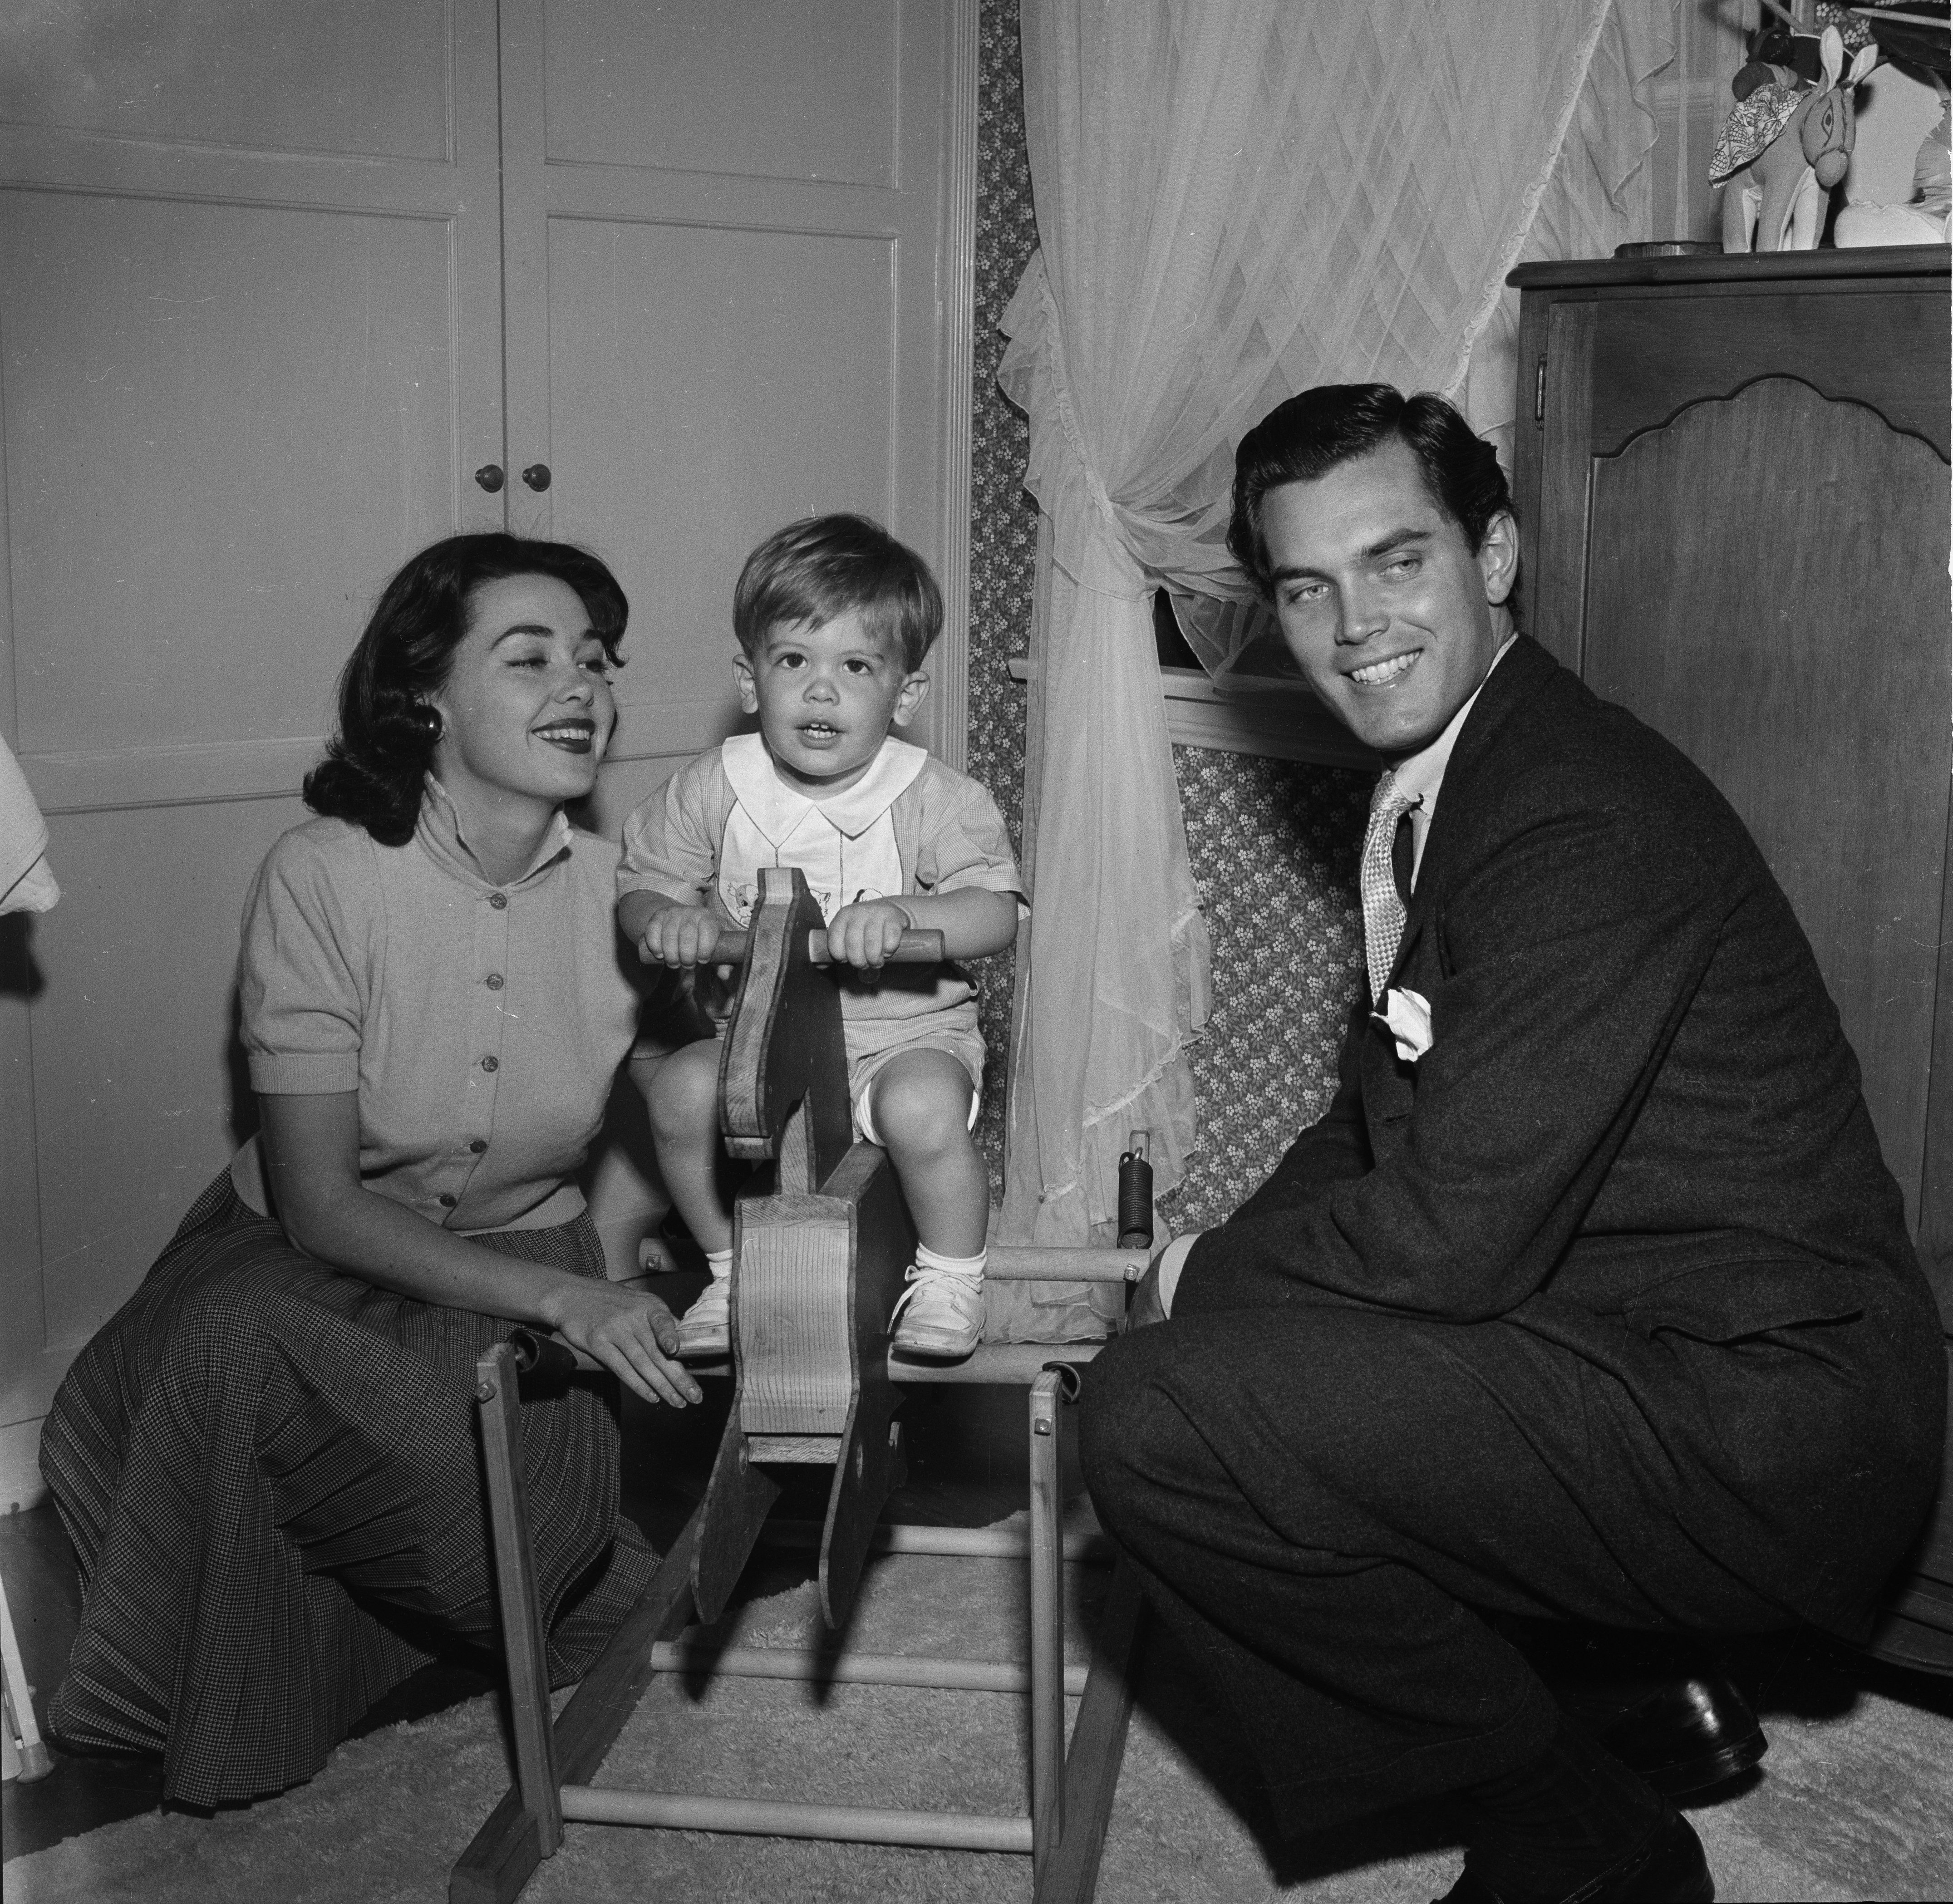 Barbara Rush, Jeffrey Hunter, and their son Christopher Hunter pose at home in Los Angeles, California, circa 1954 | Photo: Getty Images/Earl Leaf/Michael Ochs Archives